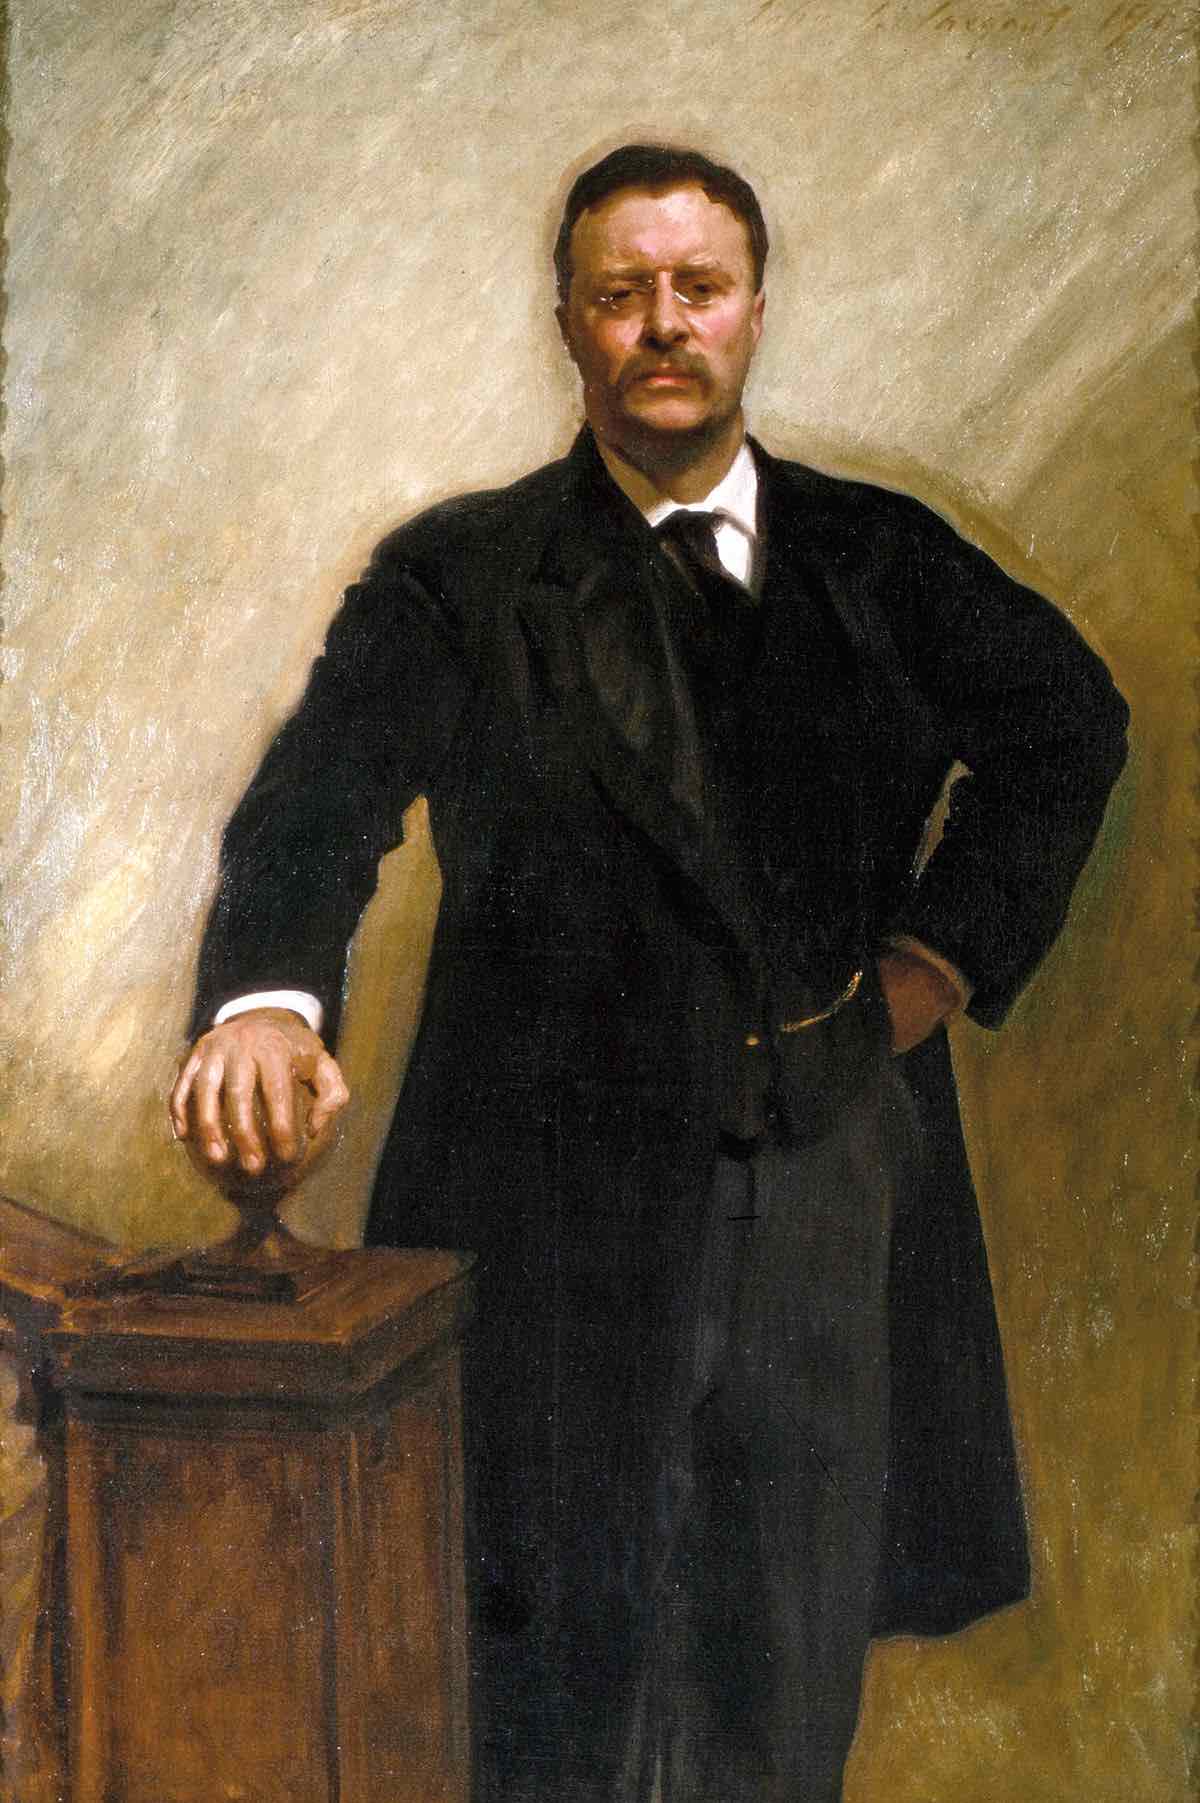 Roosevelt, posed with one
hand on a staircase banister and the other on his hip